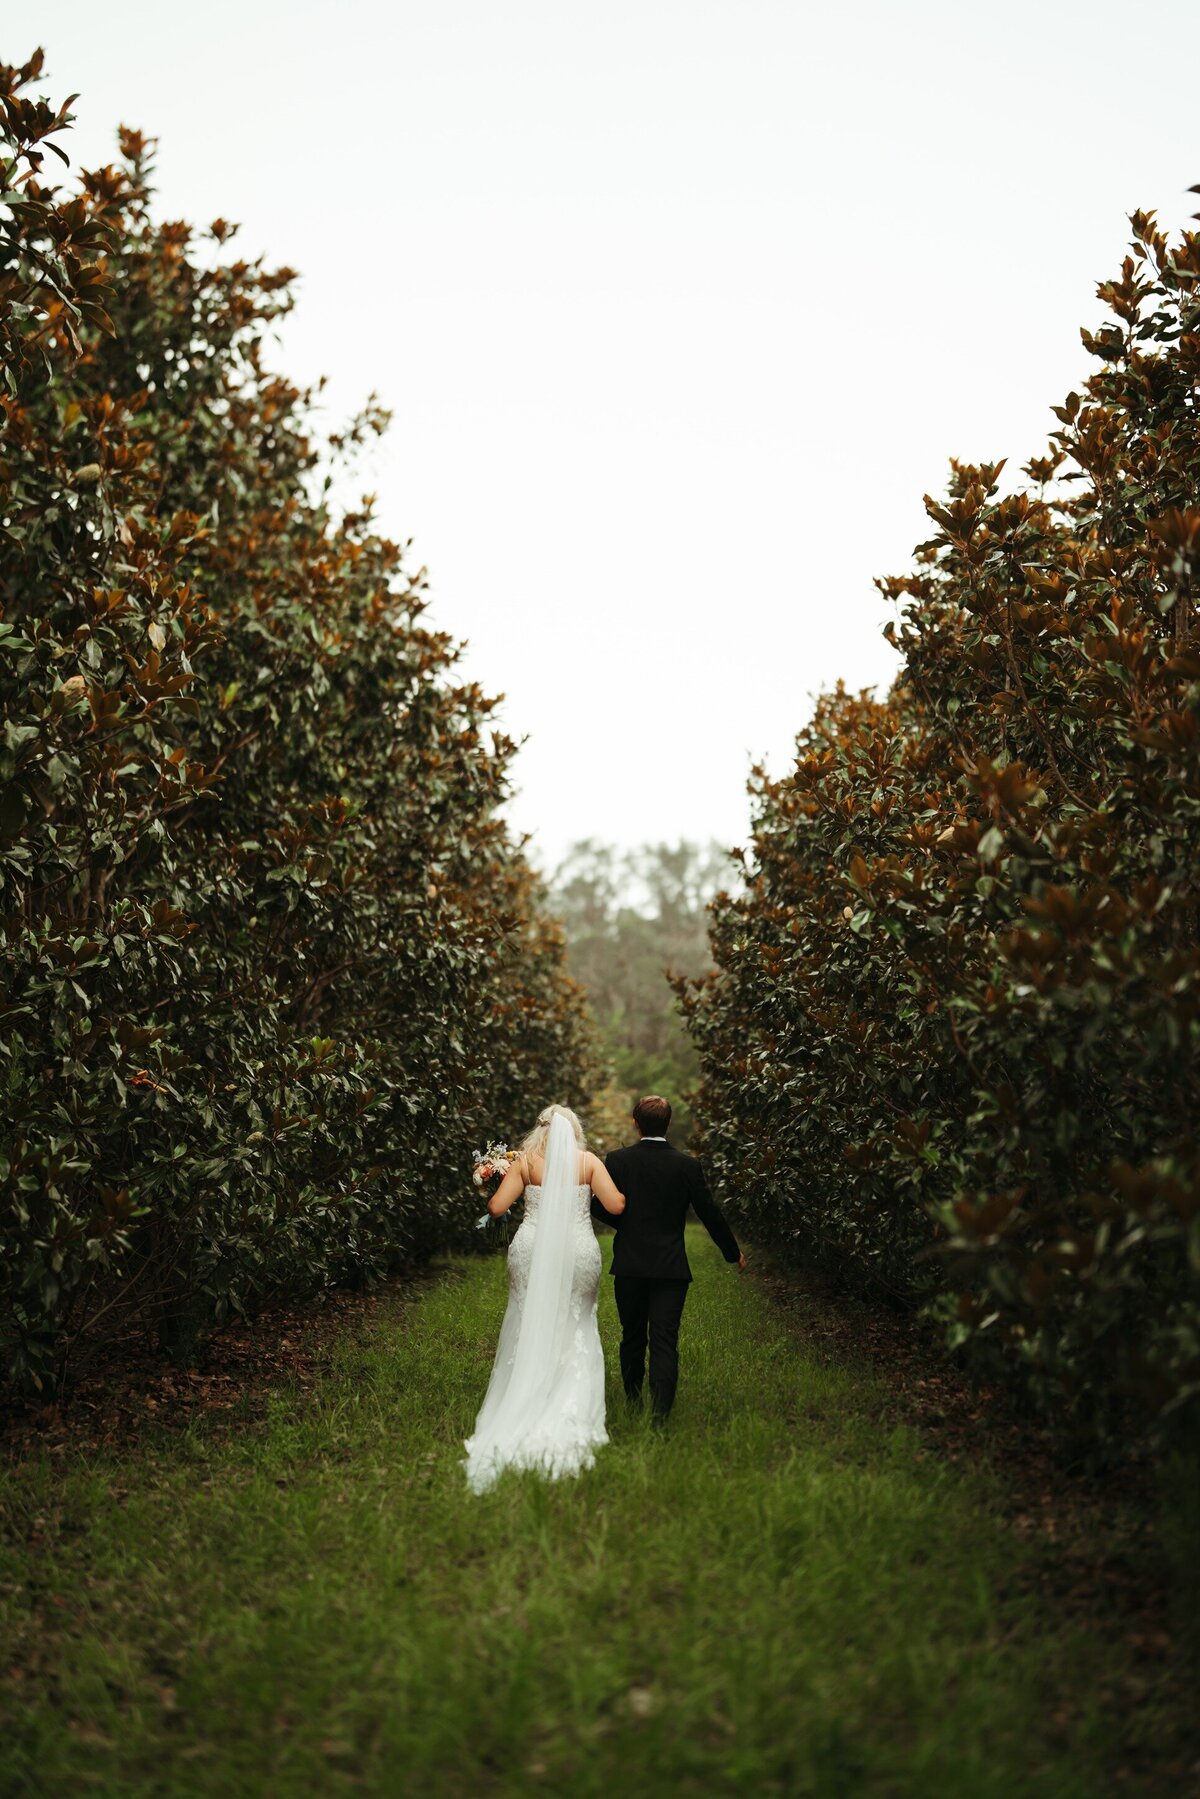 Legacy at Oak Meadows Wedding Venue - Pierson - Gainesville Florida - Weddings and Events69